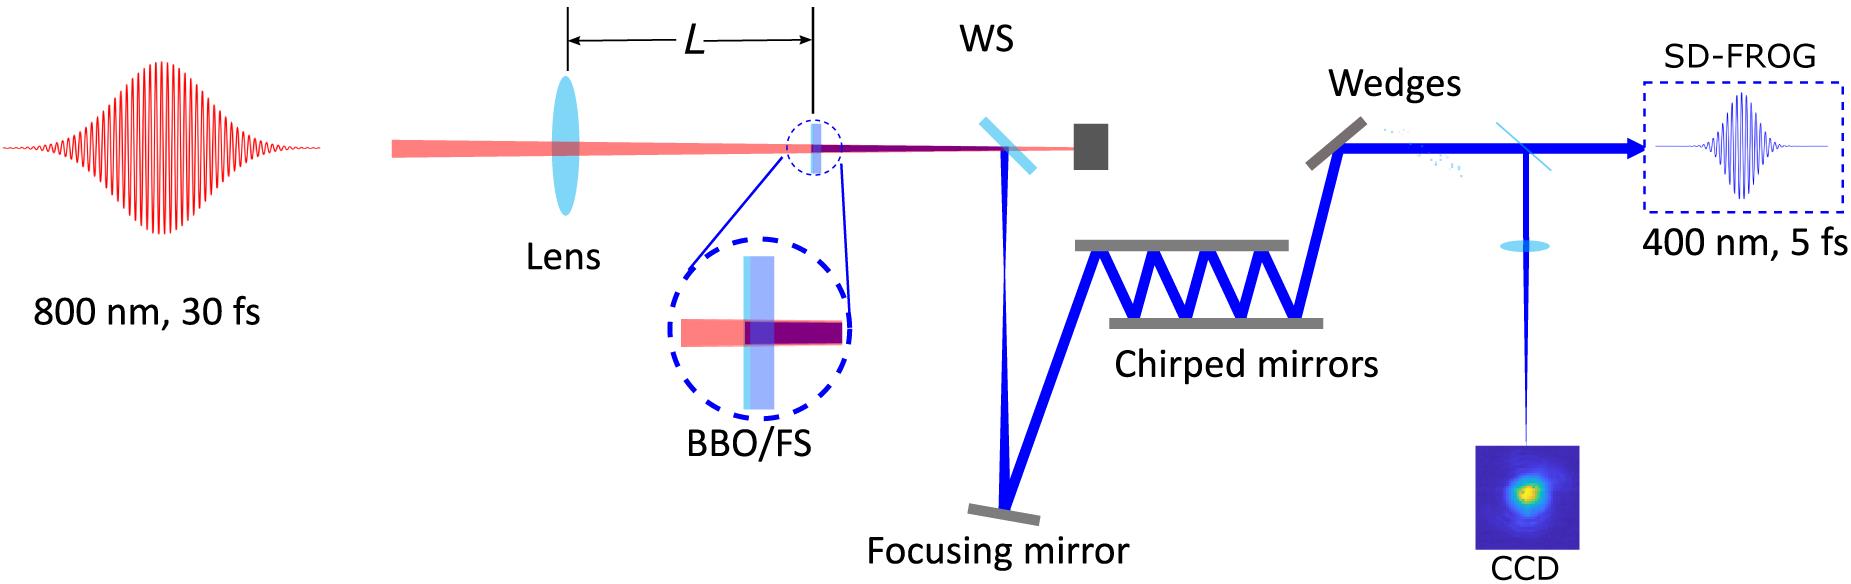 A schematic view of the experimental setup (WS, wavelength separator; FS, fused silica). The 800 nm beam is focused by a convex lens to the BBO crystal and its substrate. Afterward, the second harmonic beam is isolated and collimated before being sent to a chirped-mirror compressor. The beam profile was measured at the focus of an uncoated fused-silica lens with a focal length of 500 mm.